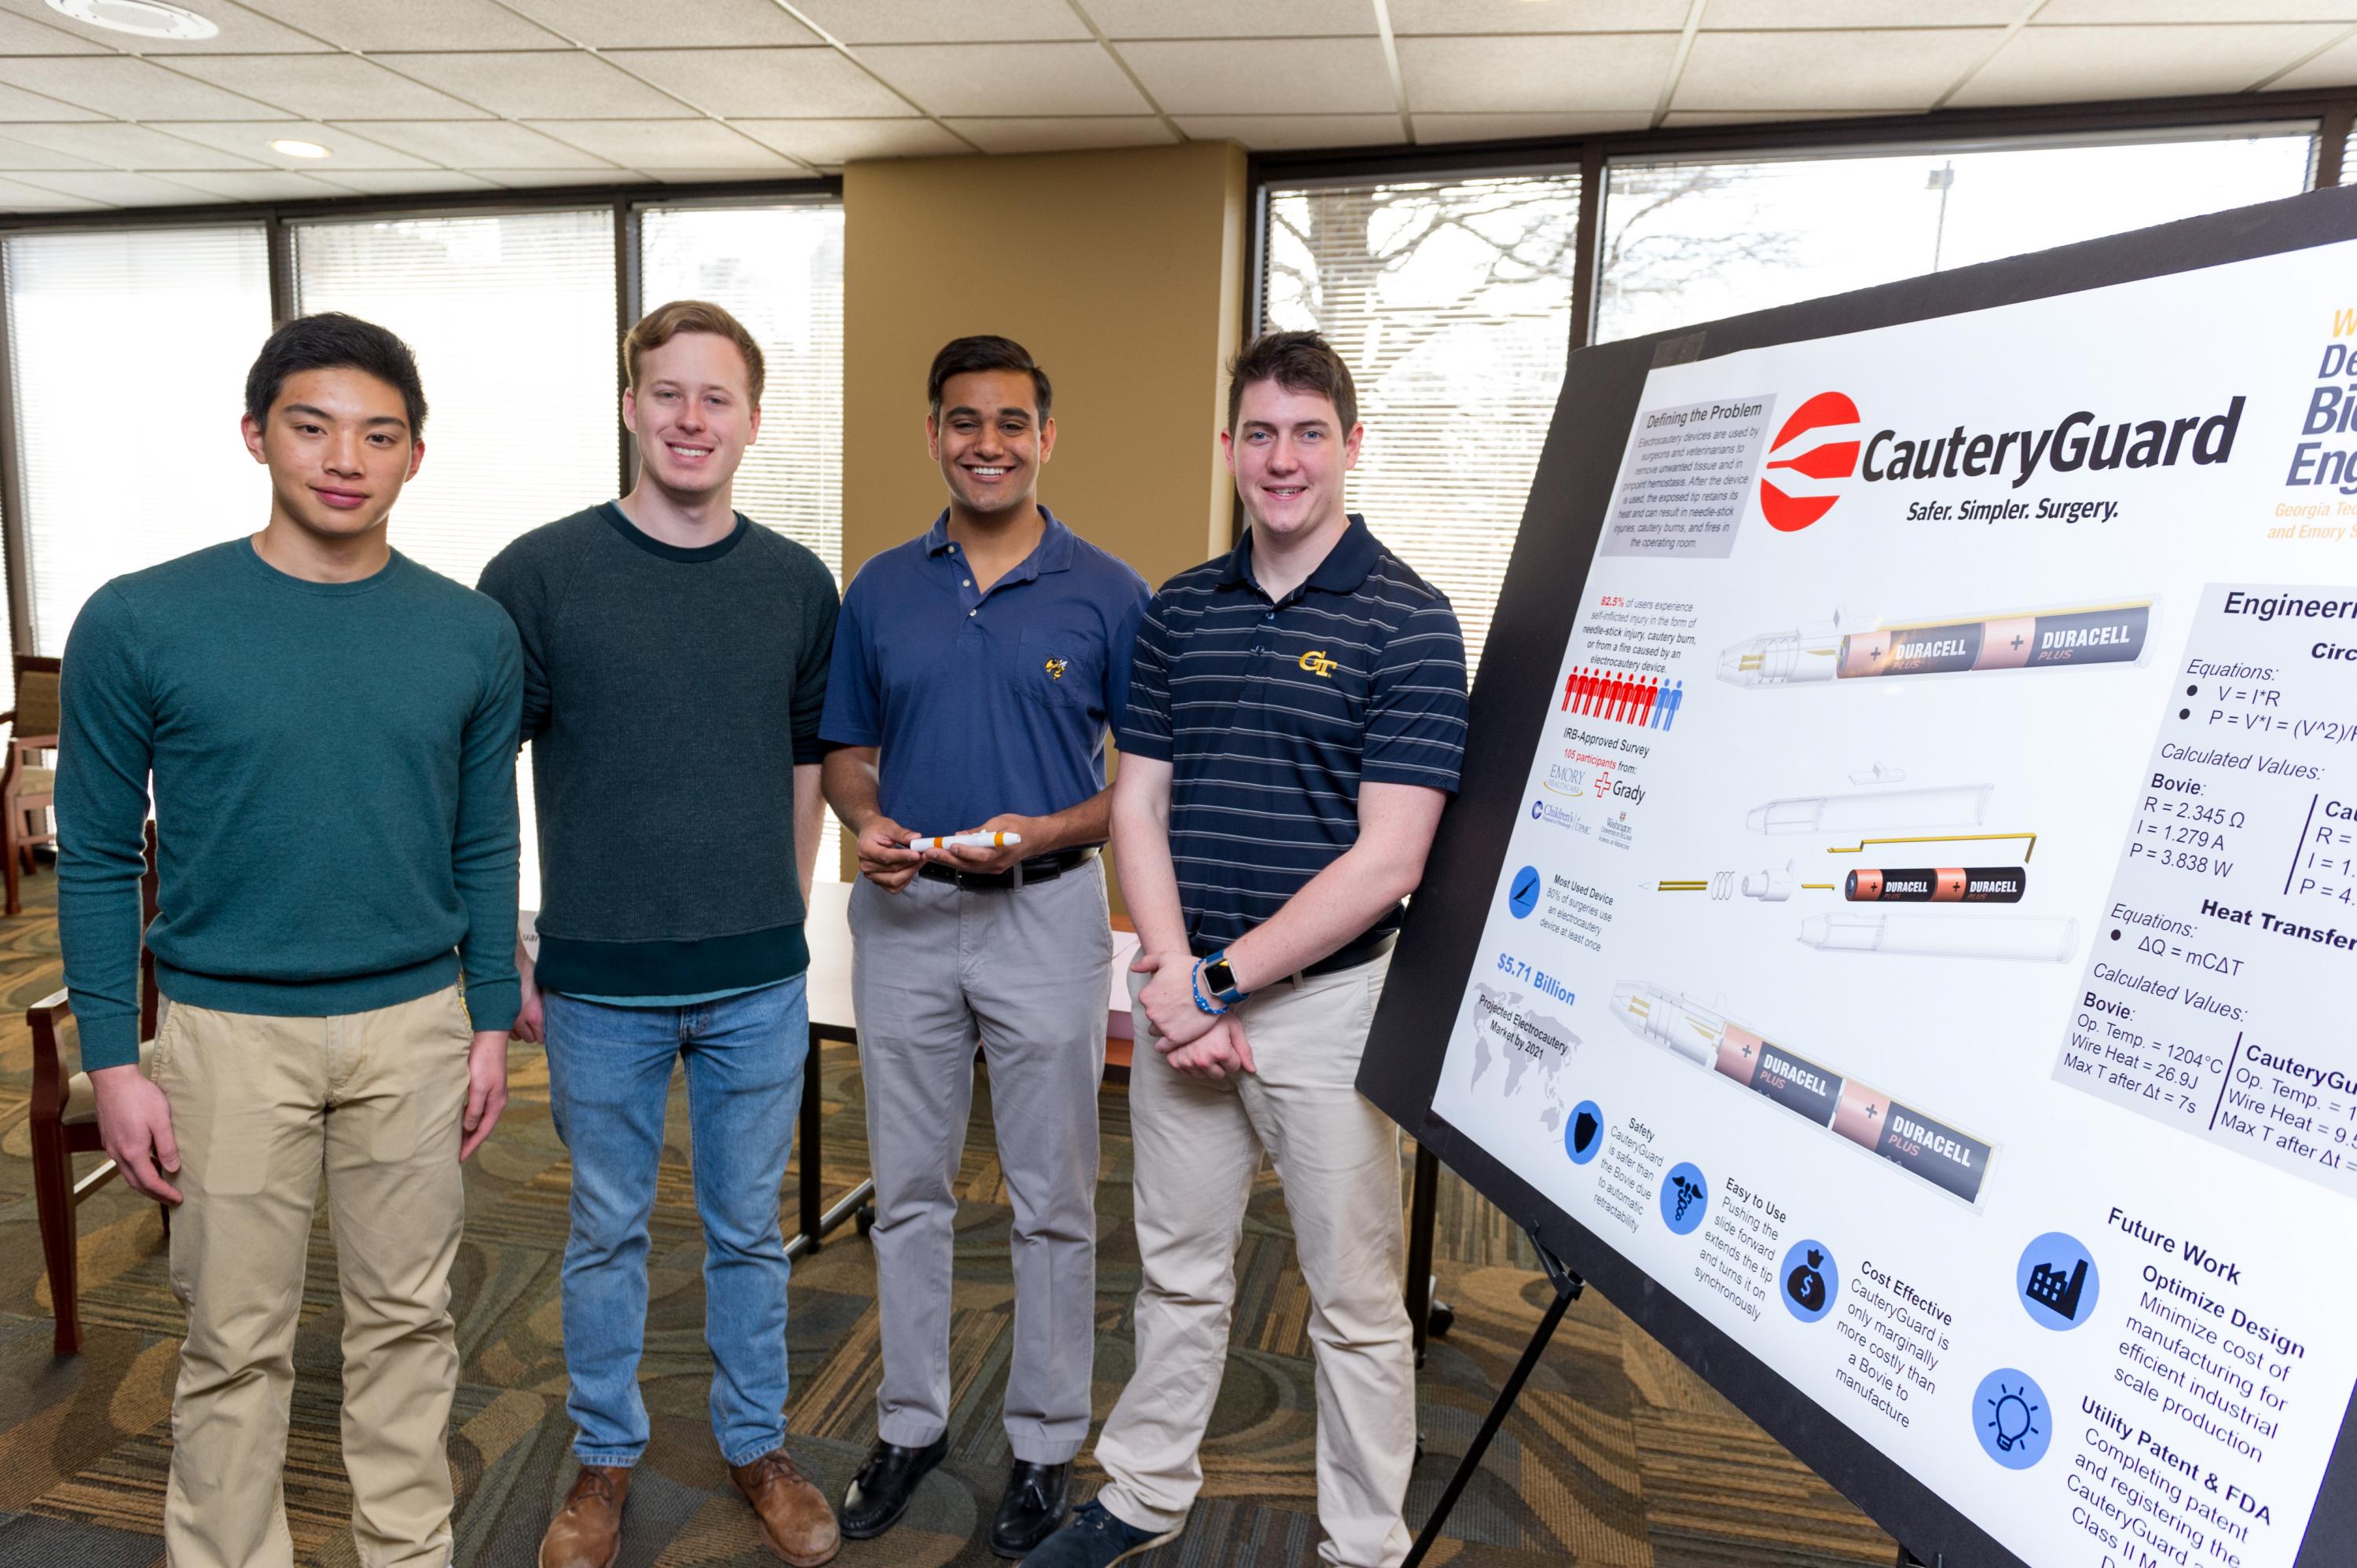 The CauteryGuard is a safer electrocautery device, which is used by doctors, veterinarians and other medical personnel to remove unwanted tissue and to stop bleeding. The CauteryGaurd automatically retracts when not in use, and the inventors said this removes any chance of accidental injury caused by the device during procedures. 

The team won the 2017 Georgia Tech InVenture Prize.

The inventors are four biomedical engineering majors – Jack Corelli from Philadelphia; Hunter Hatcher from Marietta, Ga.; 